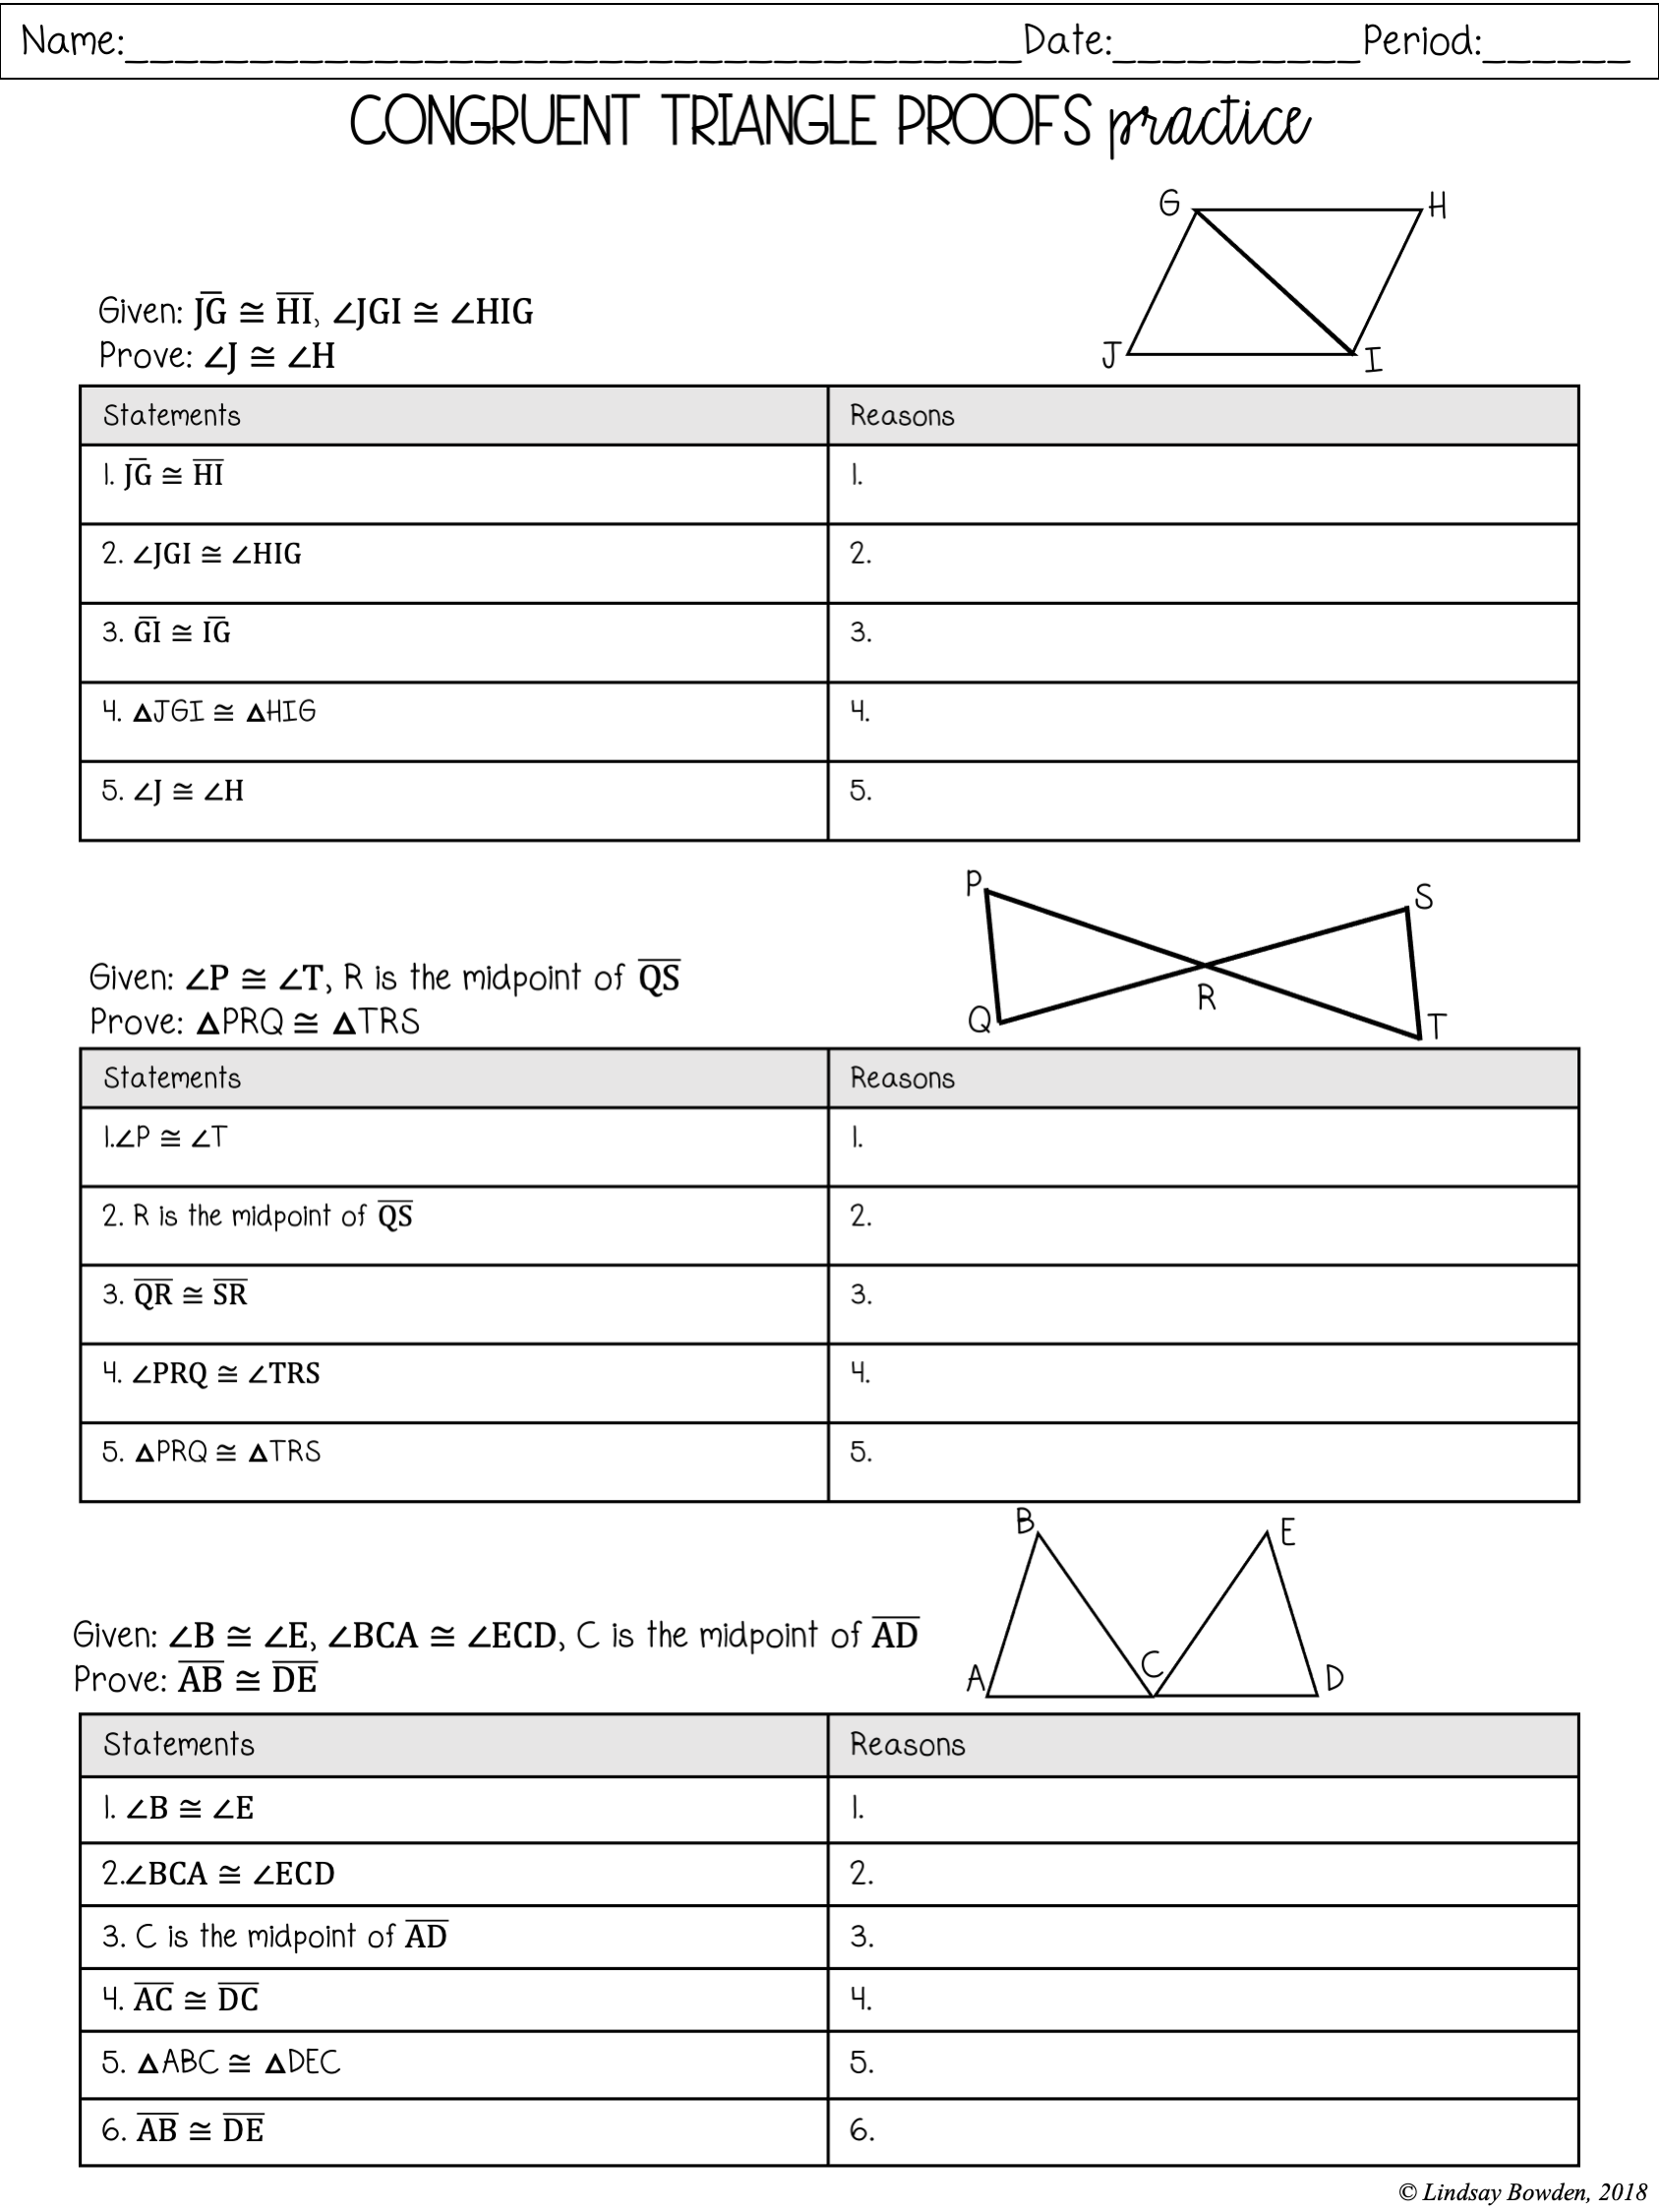 Congruent Triangles Notes and Worksheets - Lindsay Bowden Intended For Triangle Congruence Proofs Worksheet